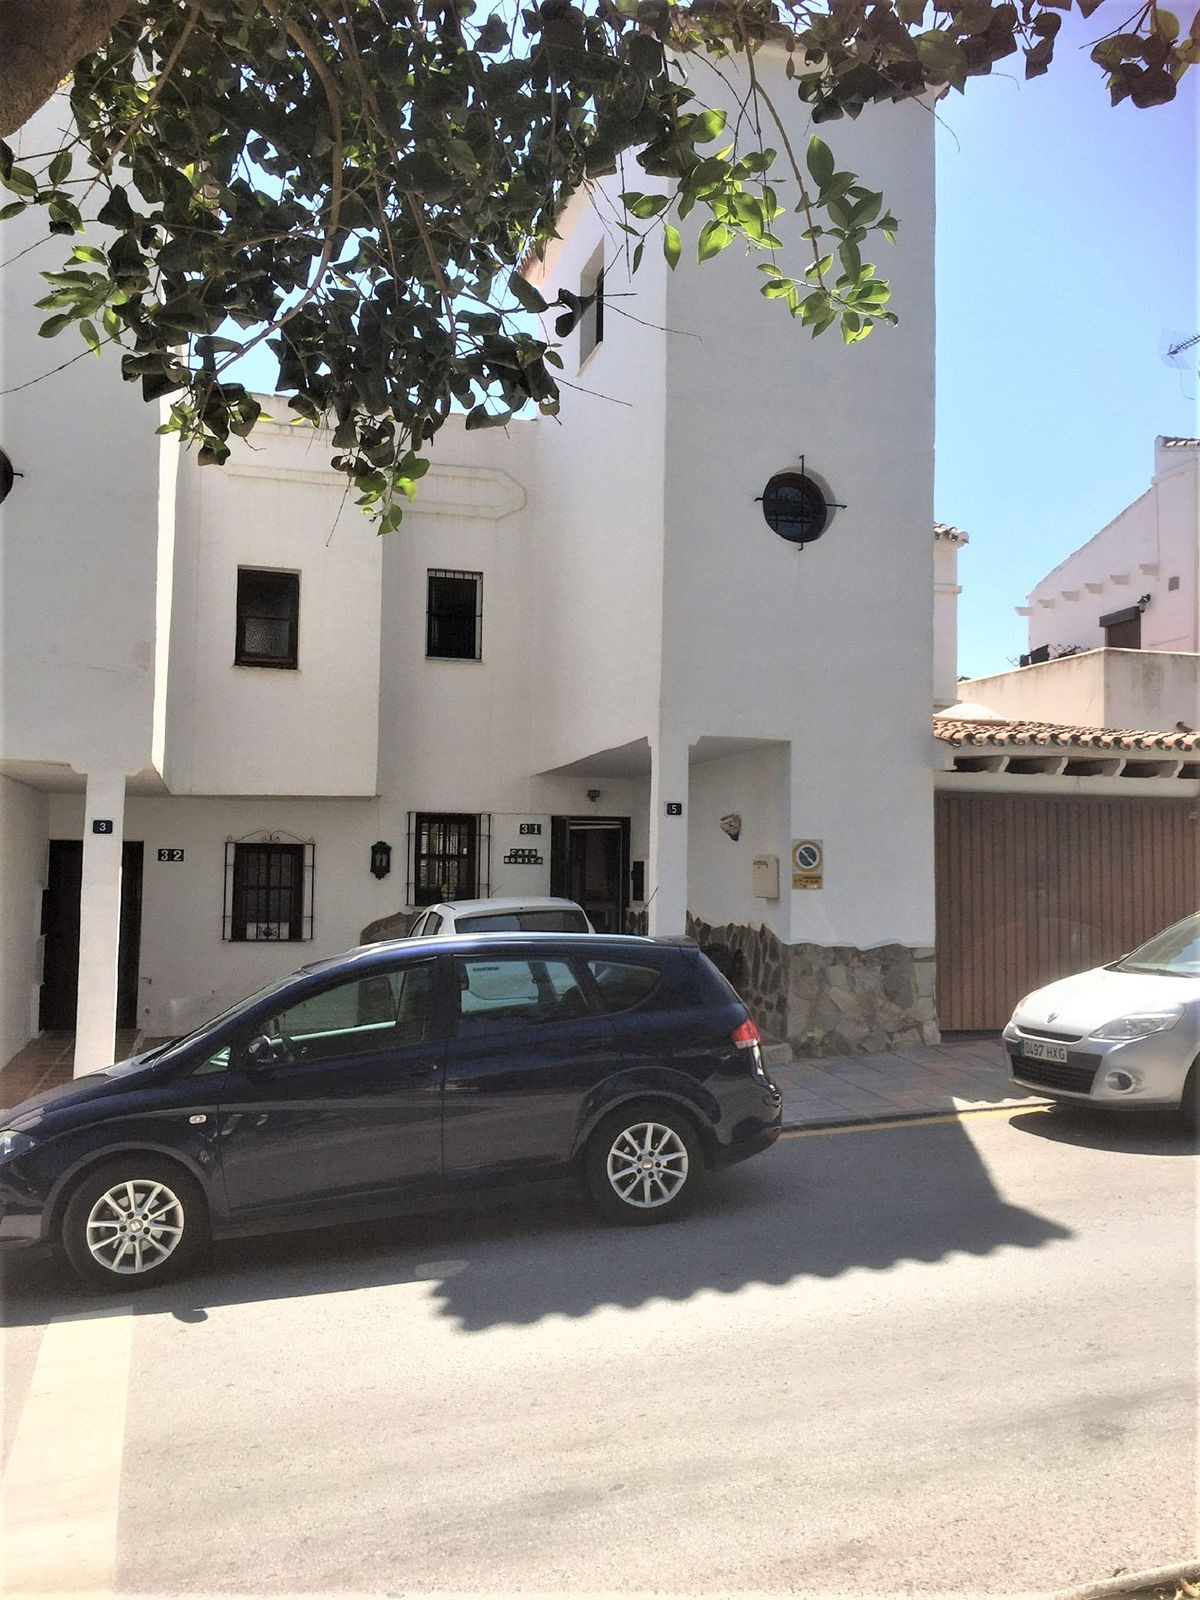 Beautifully present townhouse in Las Lagunas, close to all amenities and schools
this 3 bedroom, 2 b, Spain